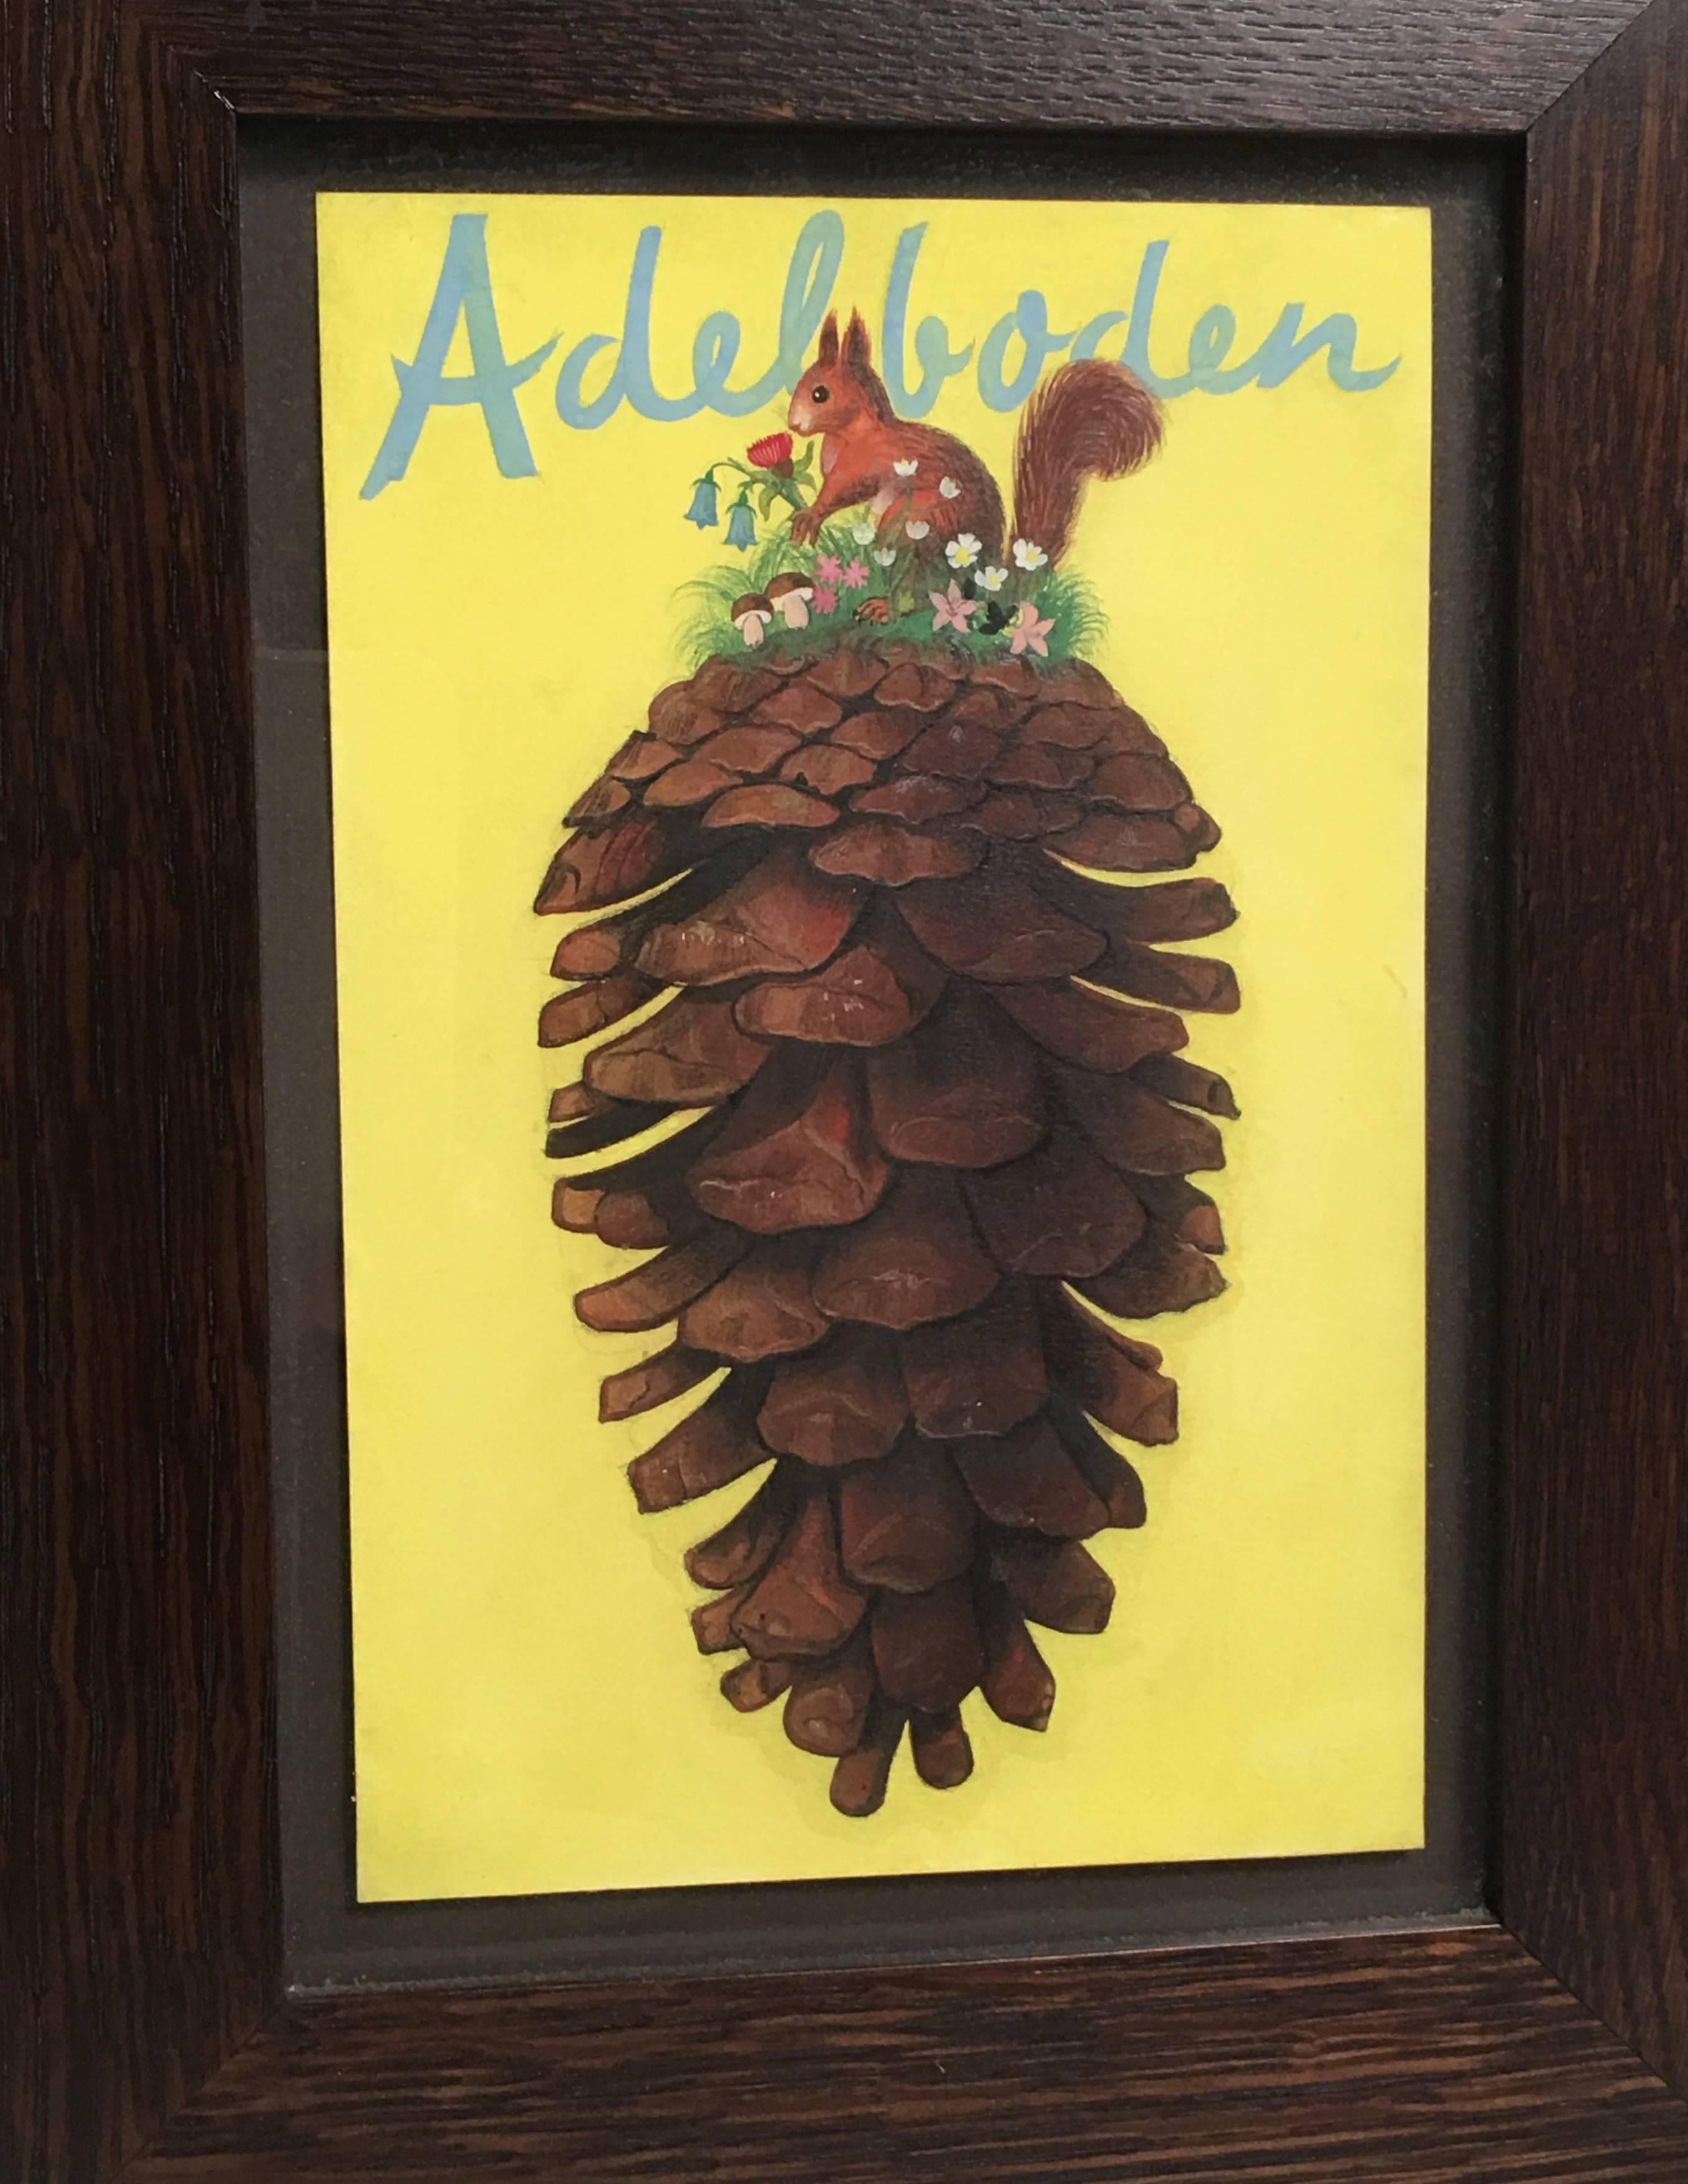 A charming and beautifully executed drawing or marquette in gouache on paper for a Swiss travel poster for Adelboden, Switzerland, renowned as a ski resort and alpine mountain holiday destination, depicting a brown squirrel in a field of wild